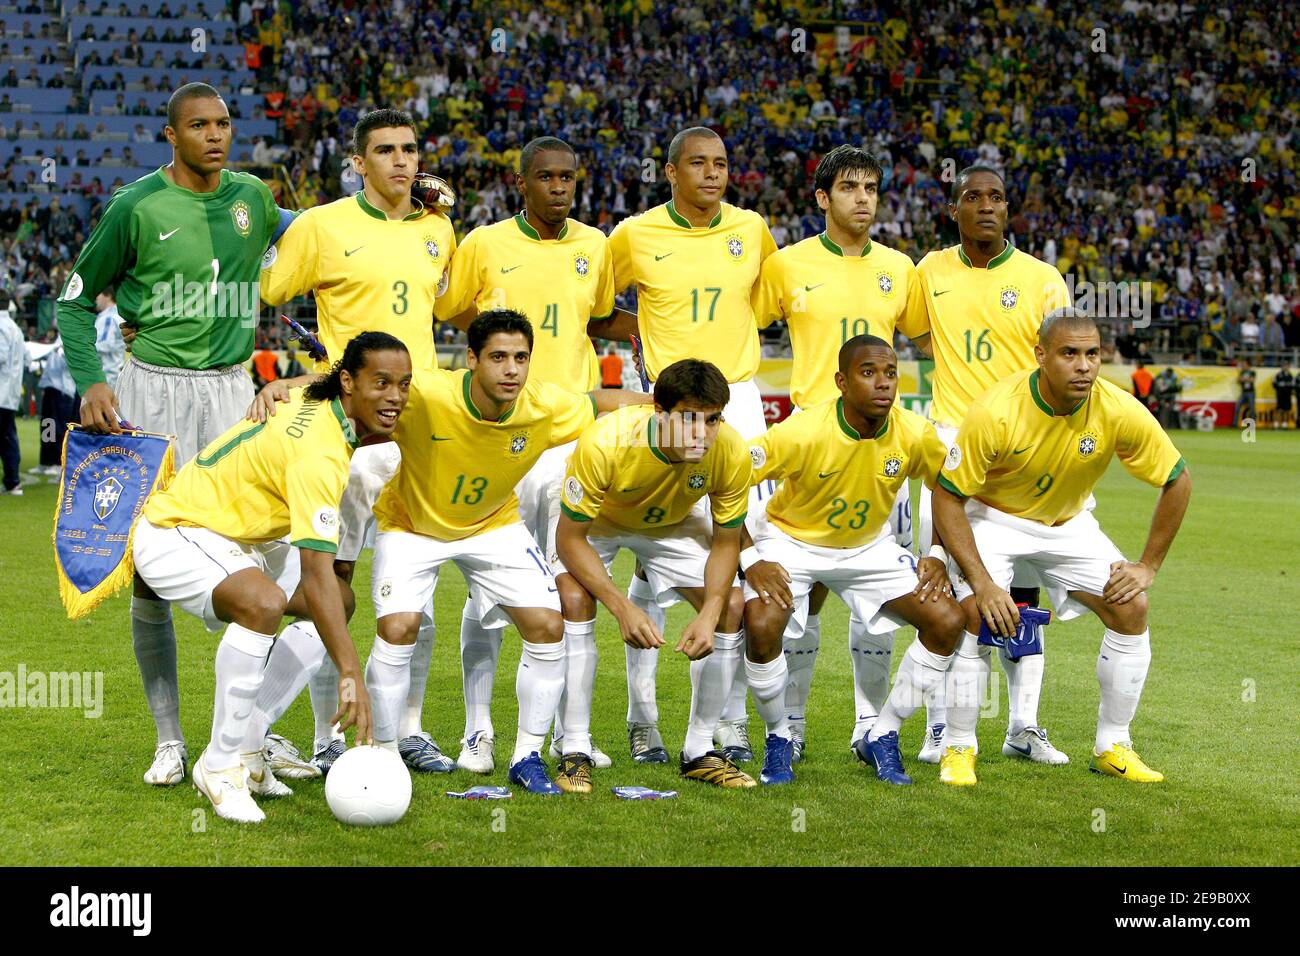 Brazil'S Soccer Team During The World Cup 2006, Group F, Japan Vs Brazil At  The Signal